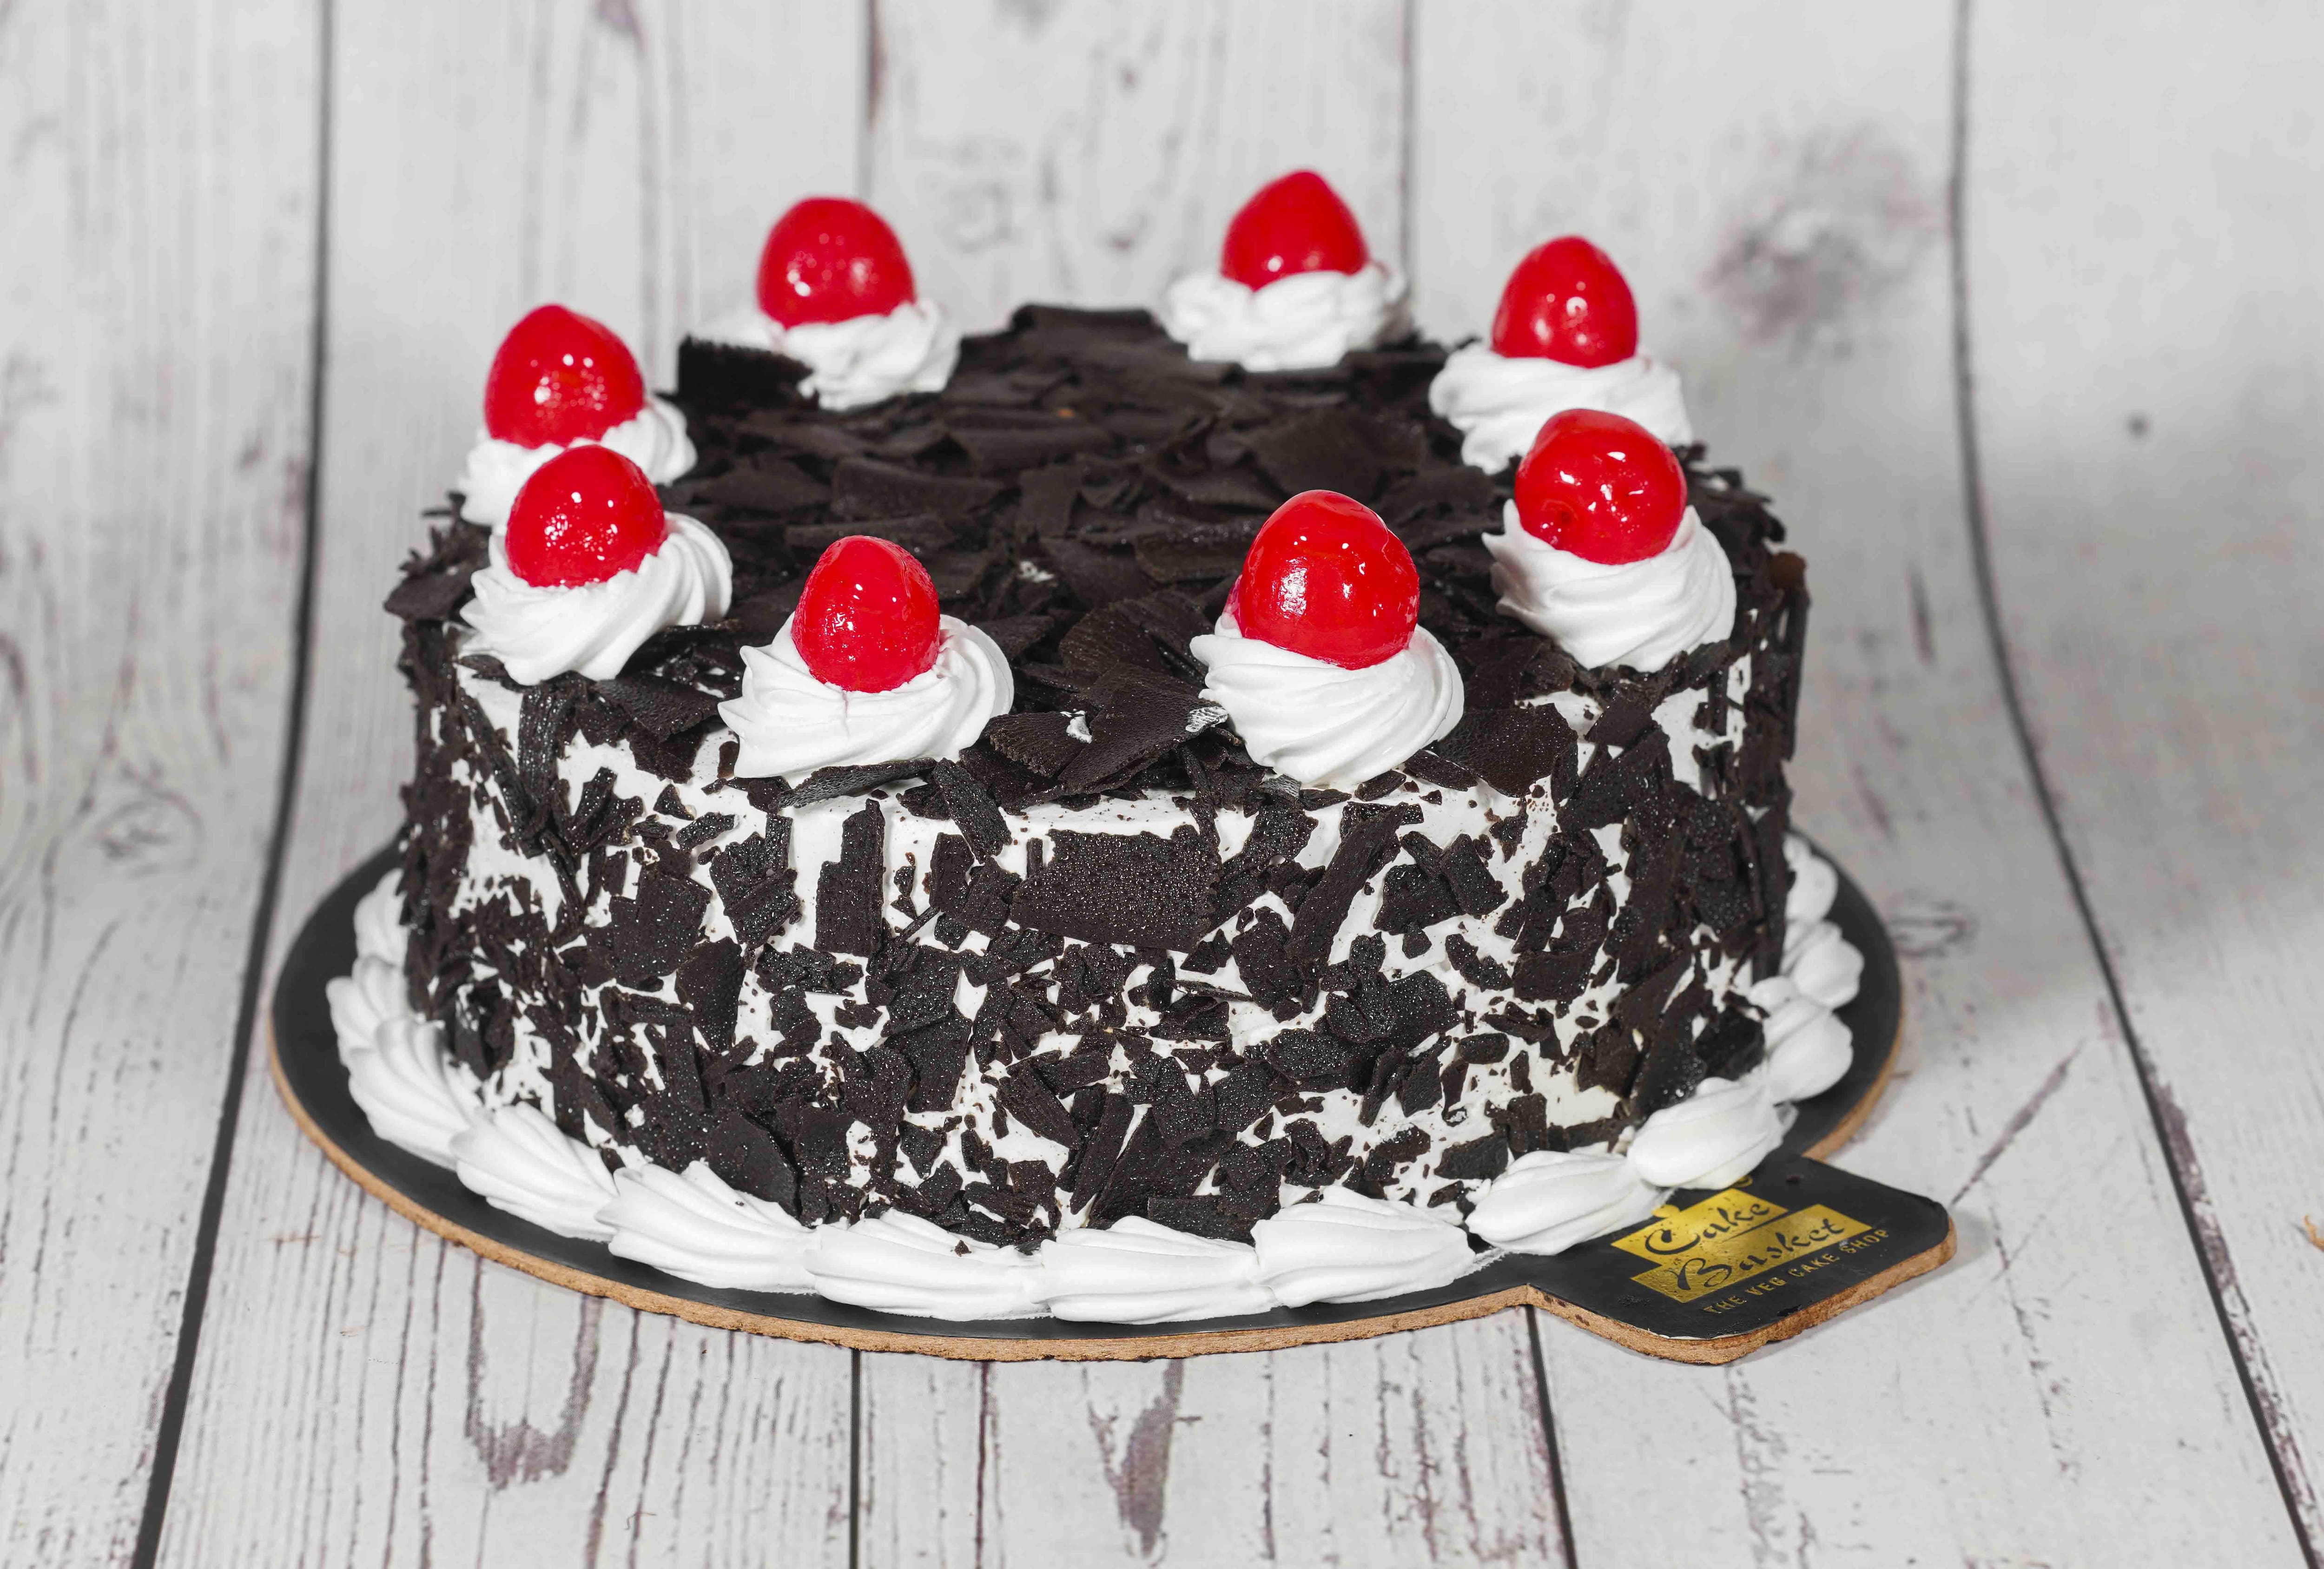 Send Cakes to Andheri East, Free Delivery